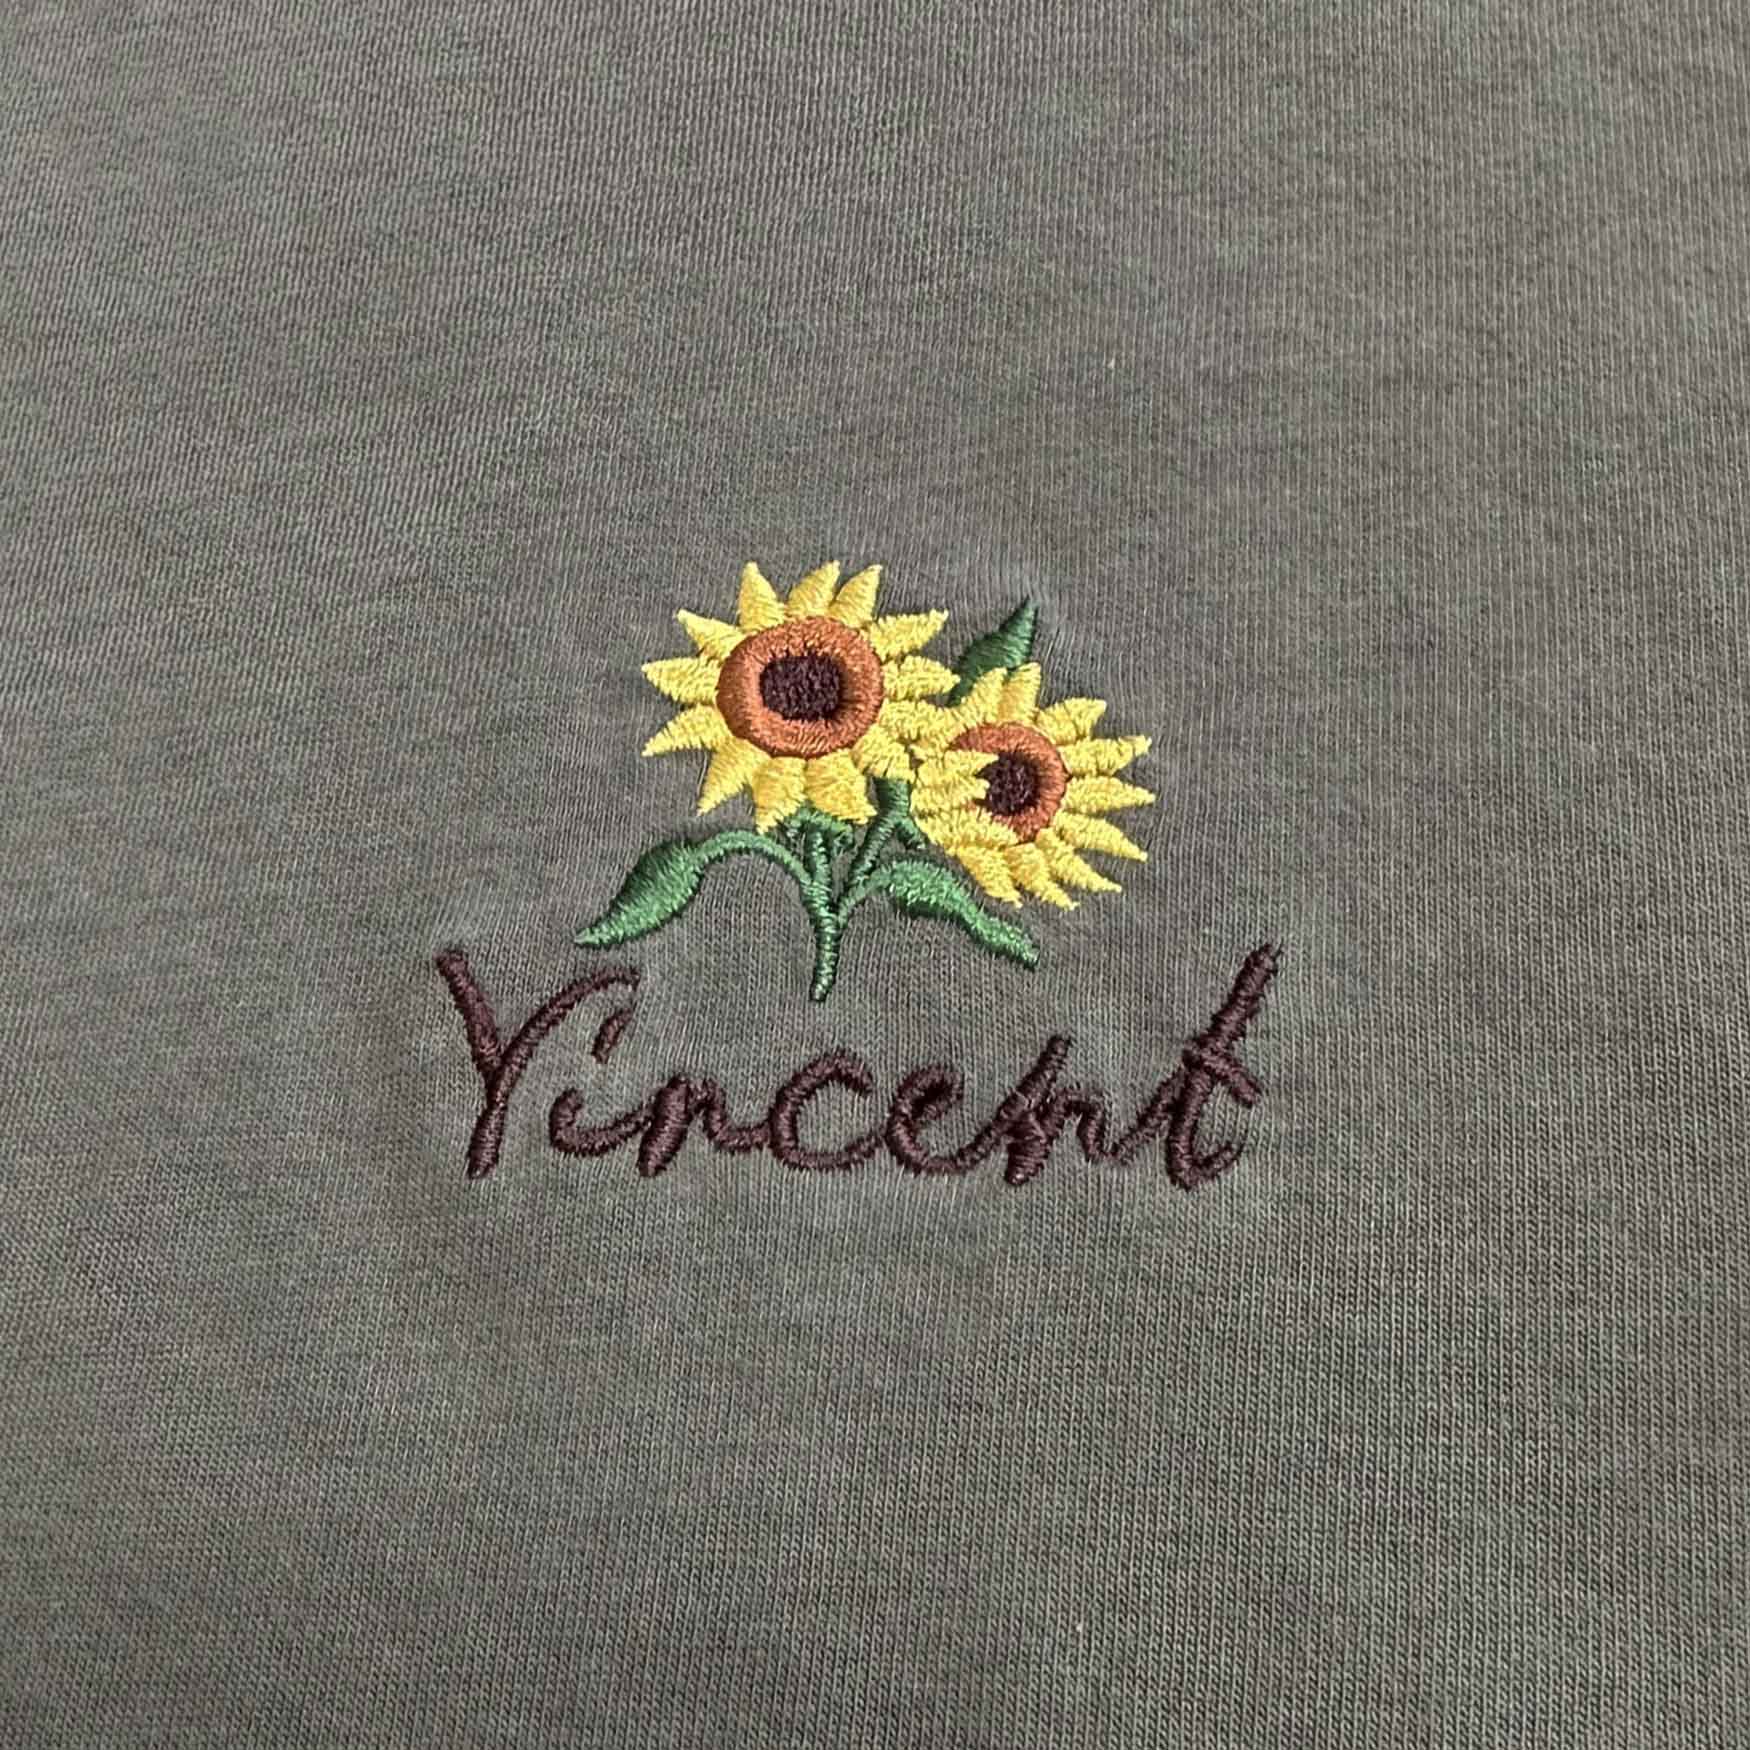 VINCENT SUNFLOWER EMBROIDERY